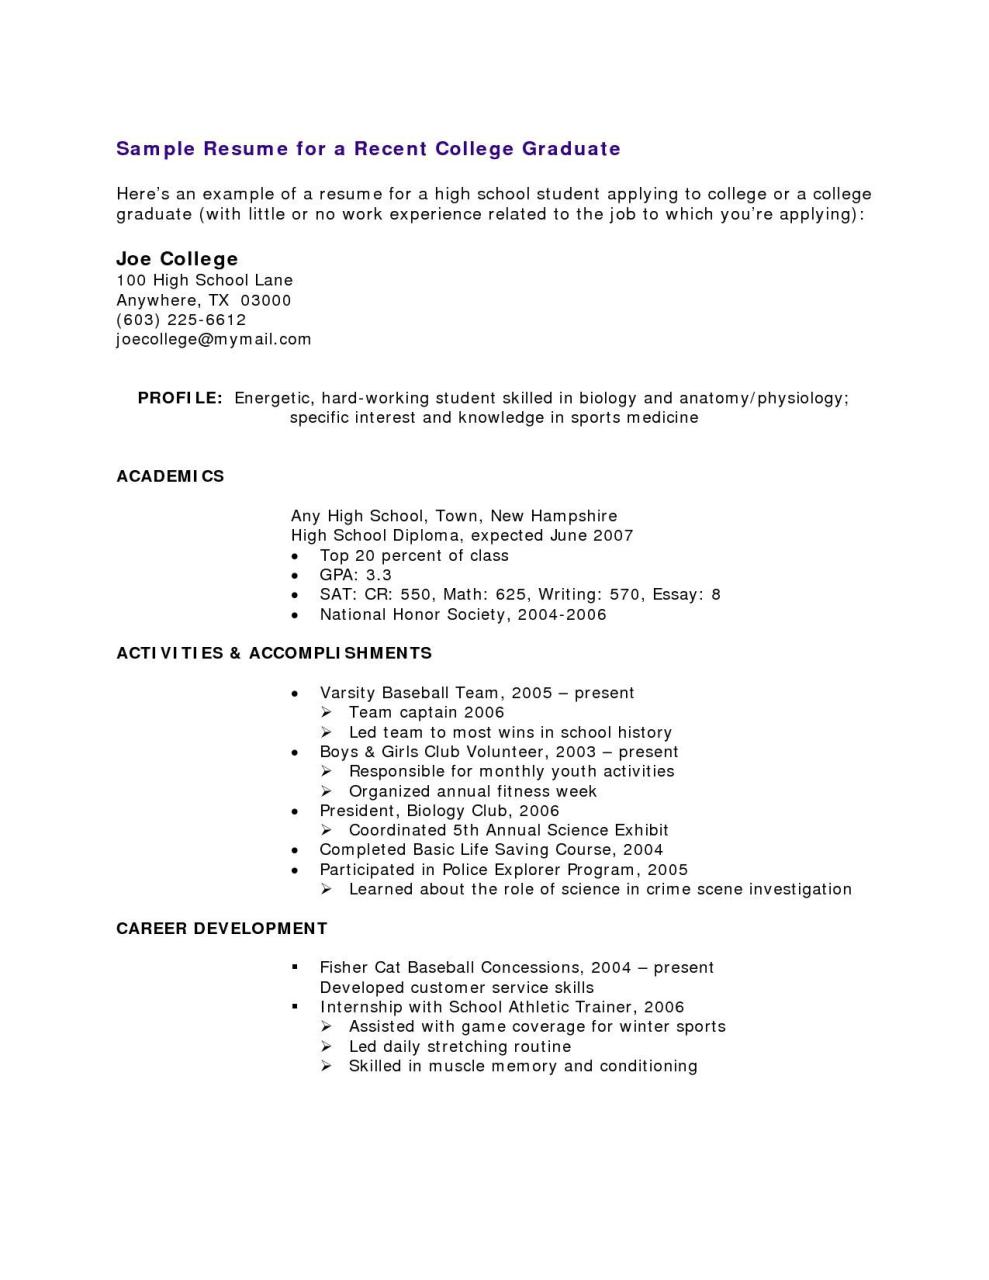 How To Write A Resume For College Application